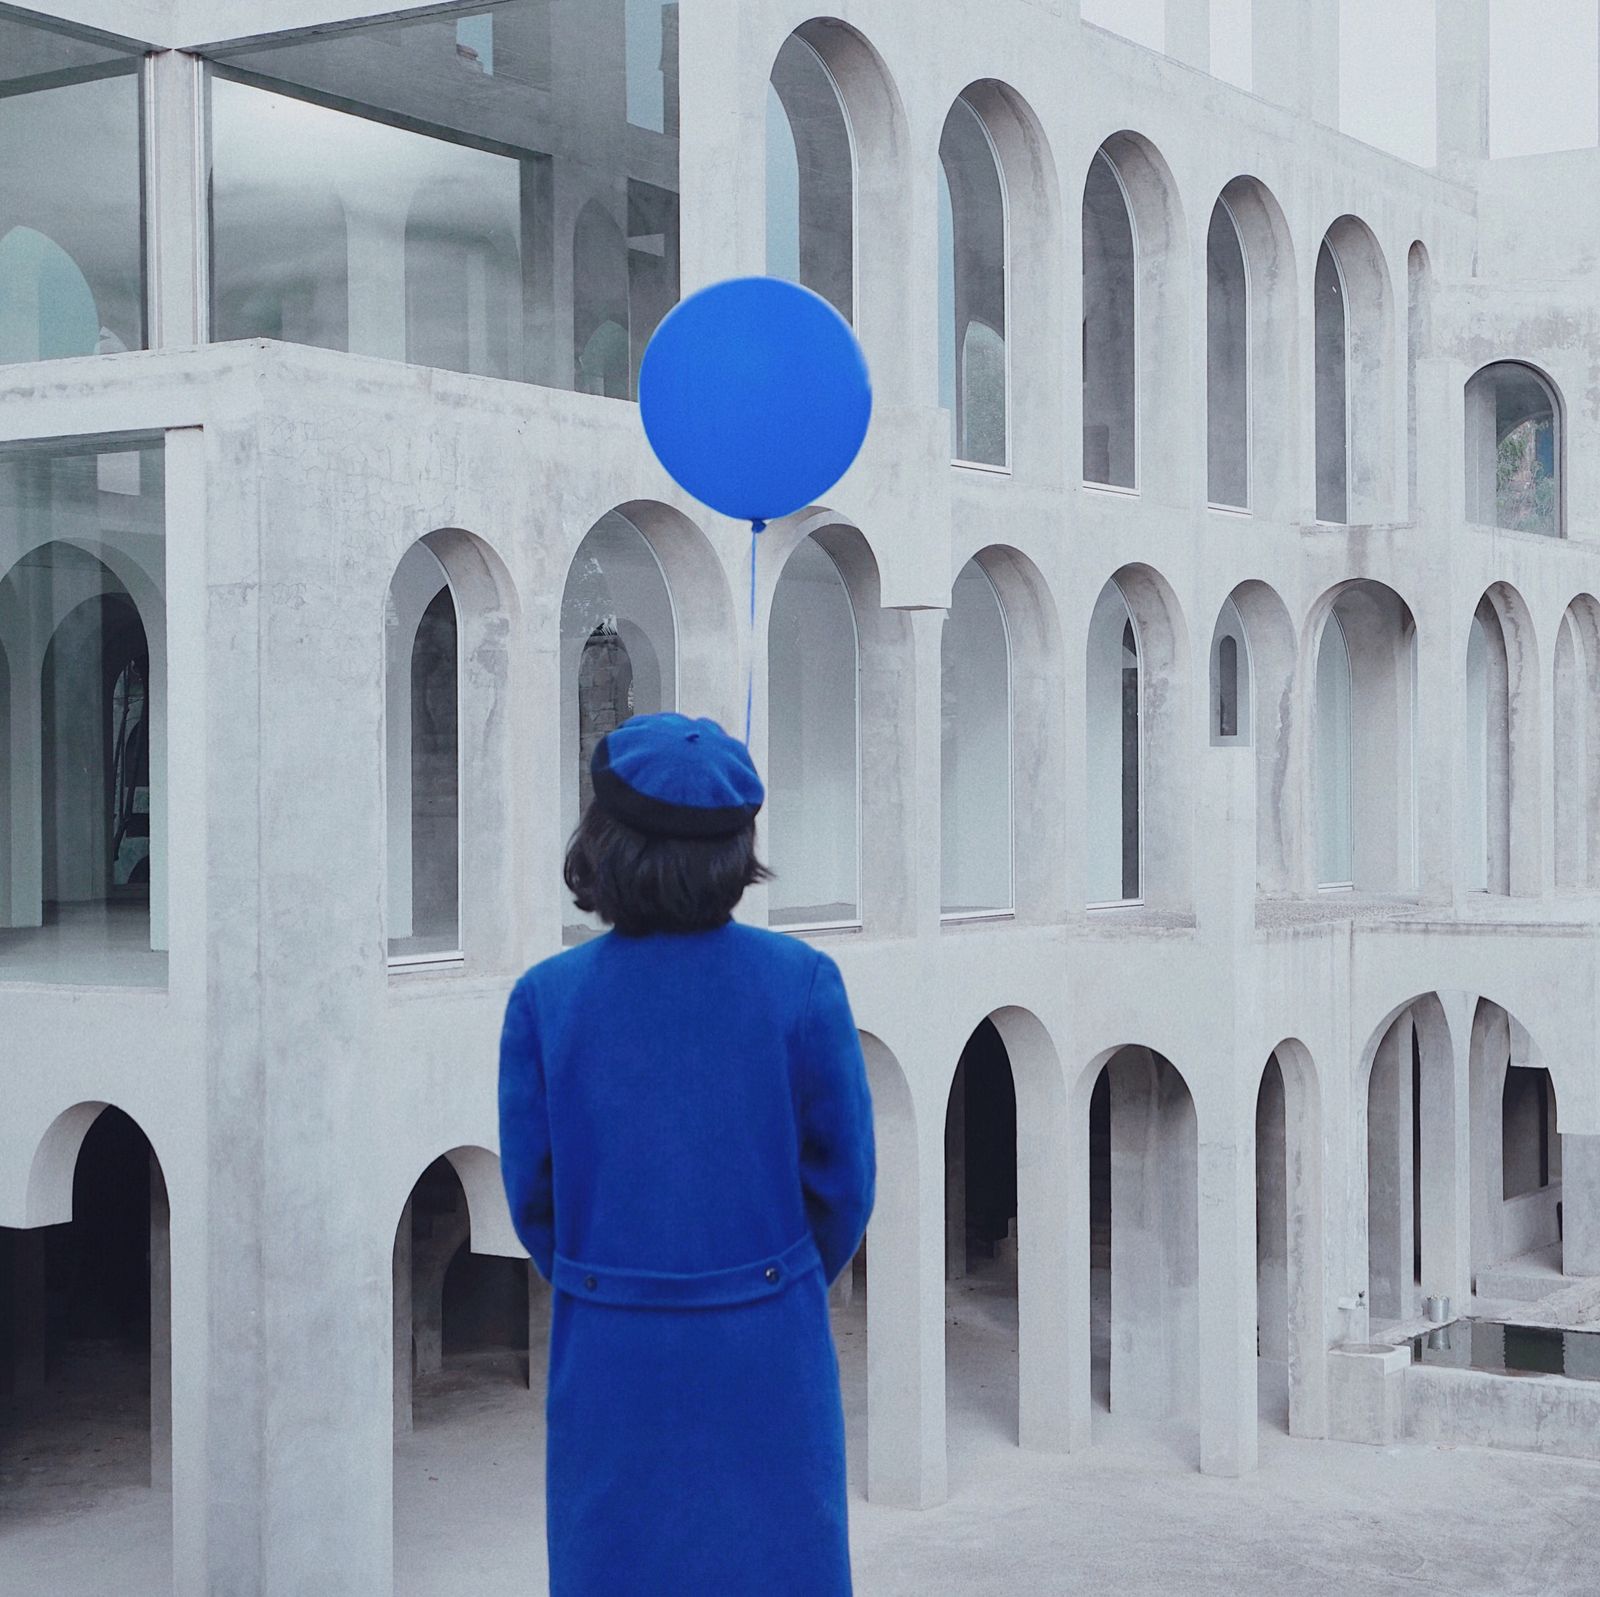 © Ting Miao - Image from the The Blue Balloon photography project